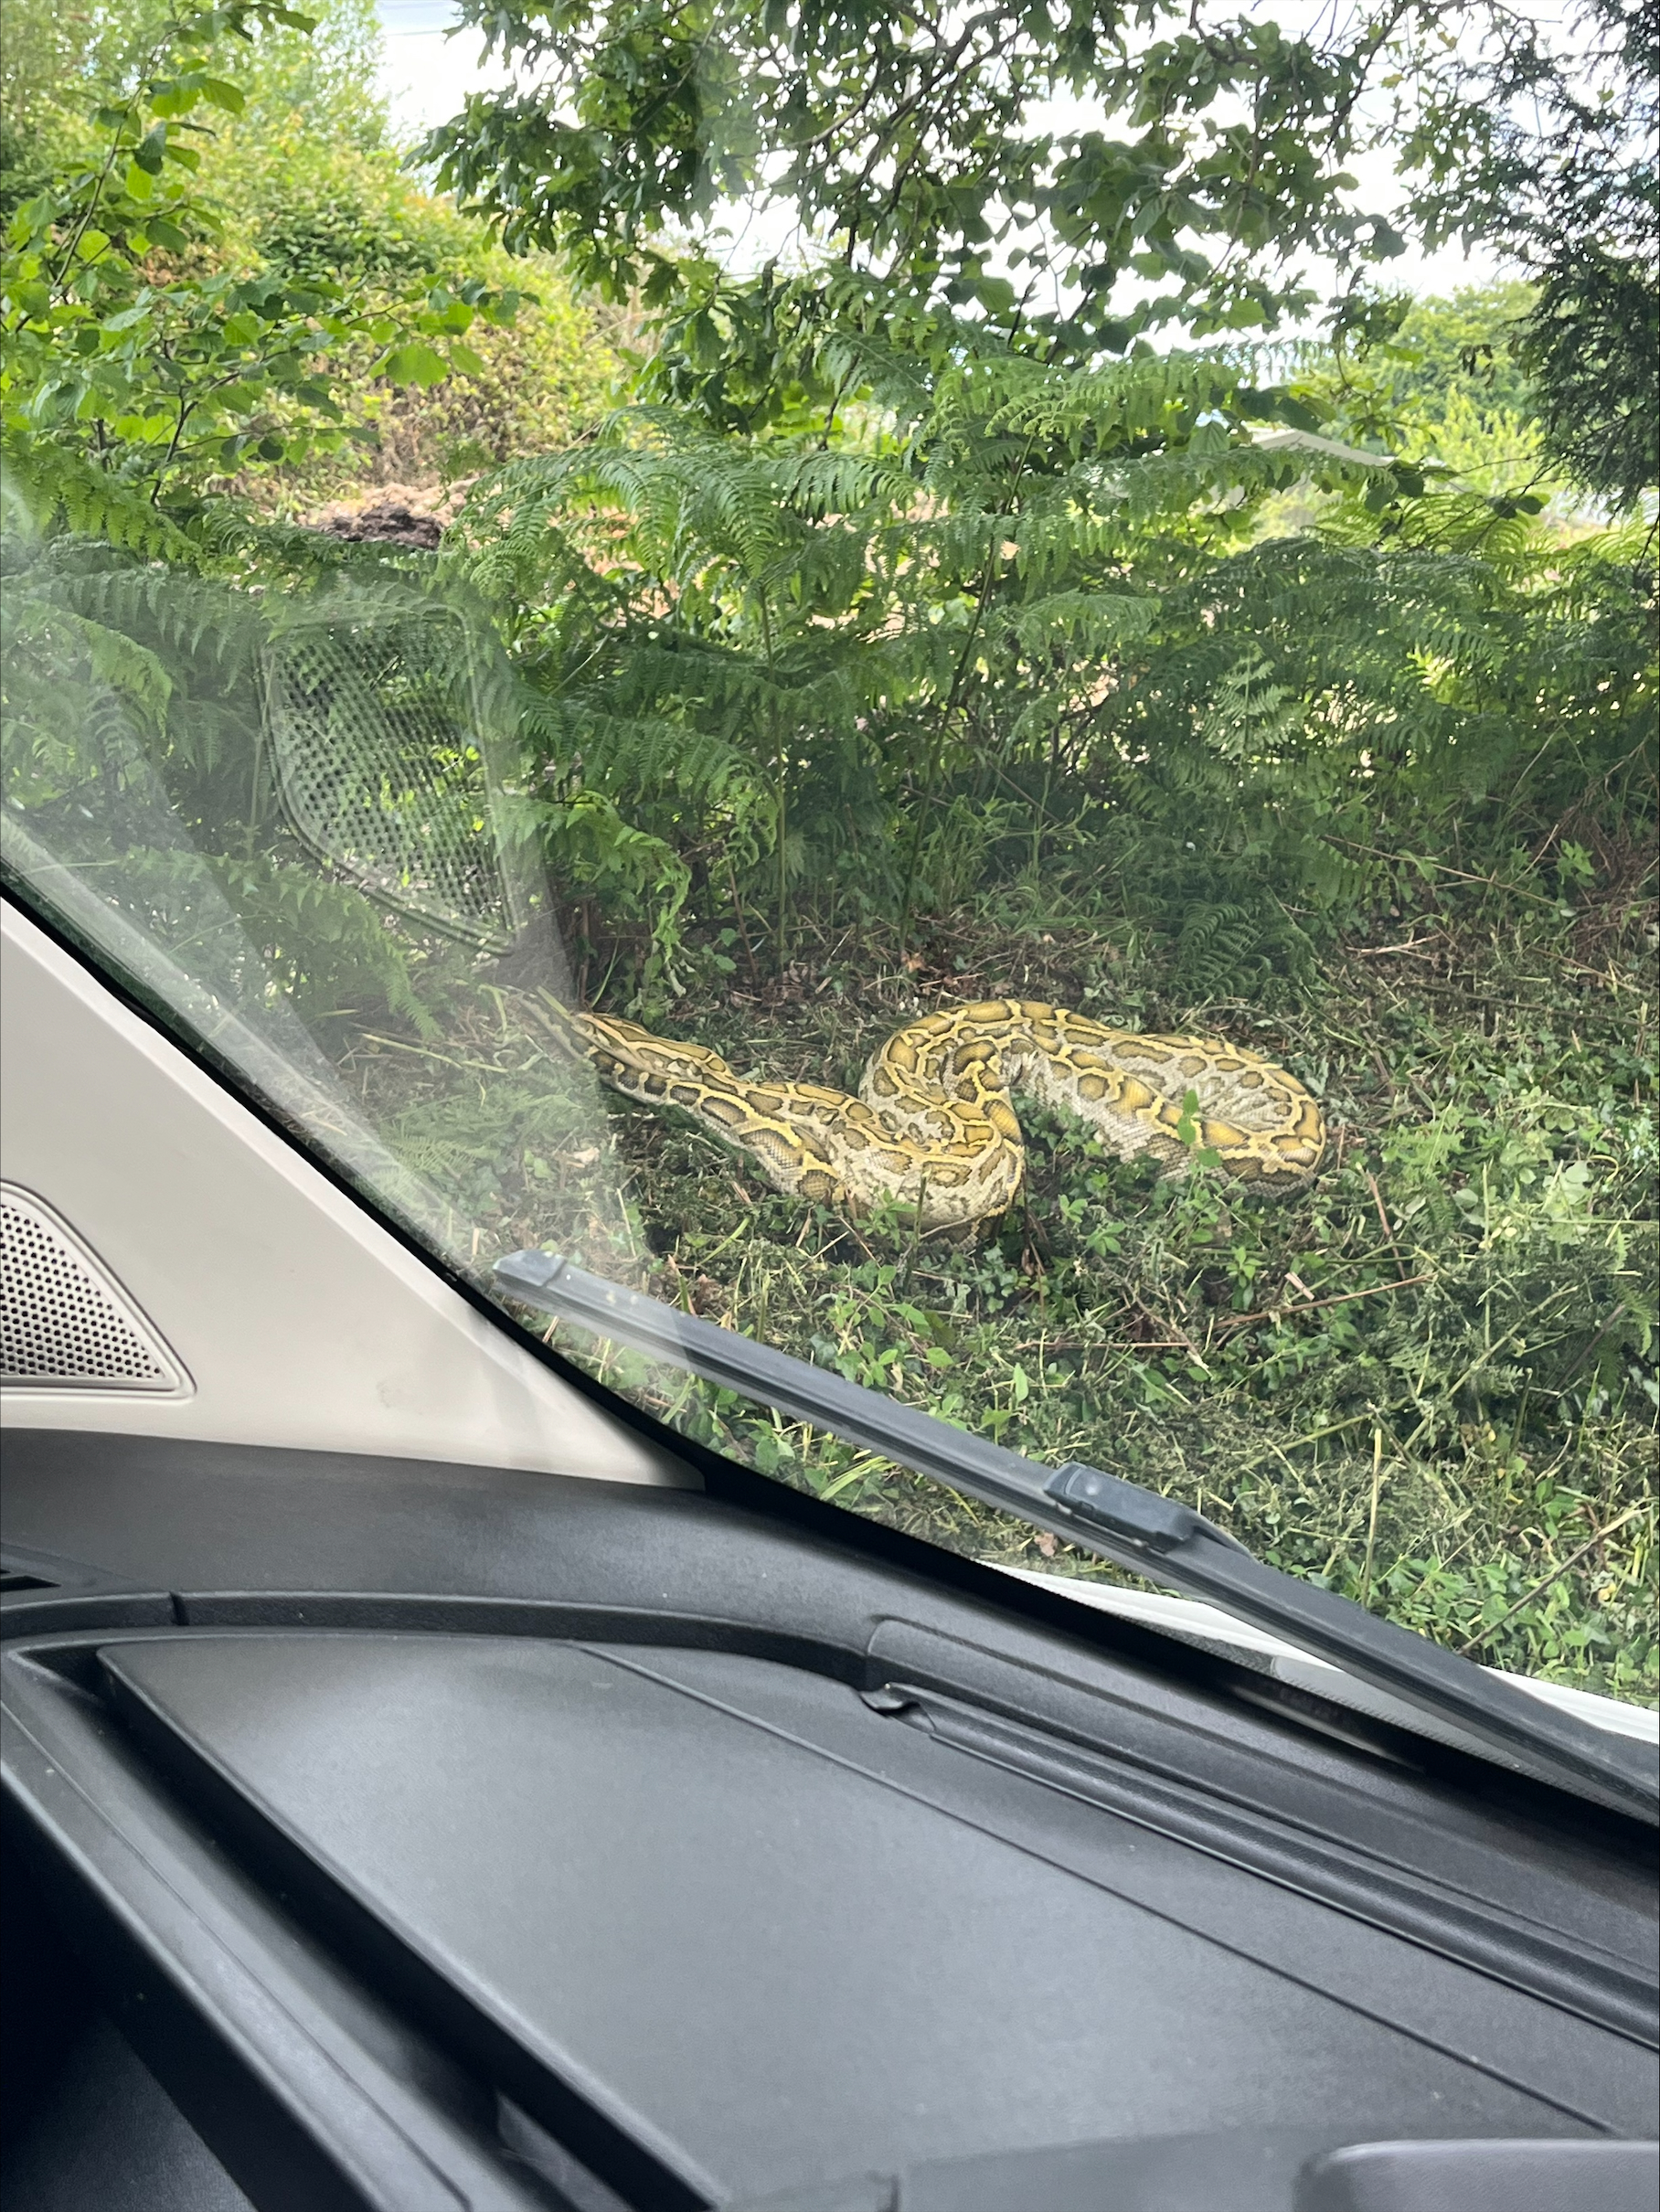 Holiday-park guests were frozen with fear after a 14ft snake slithered past their windows